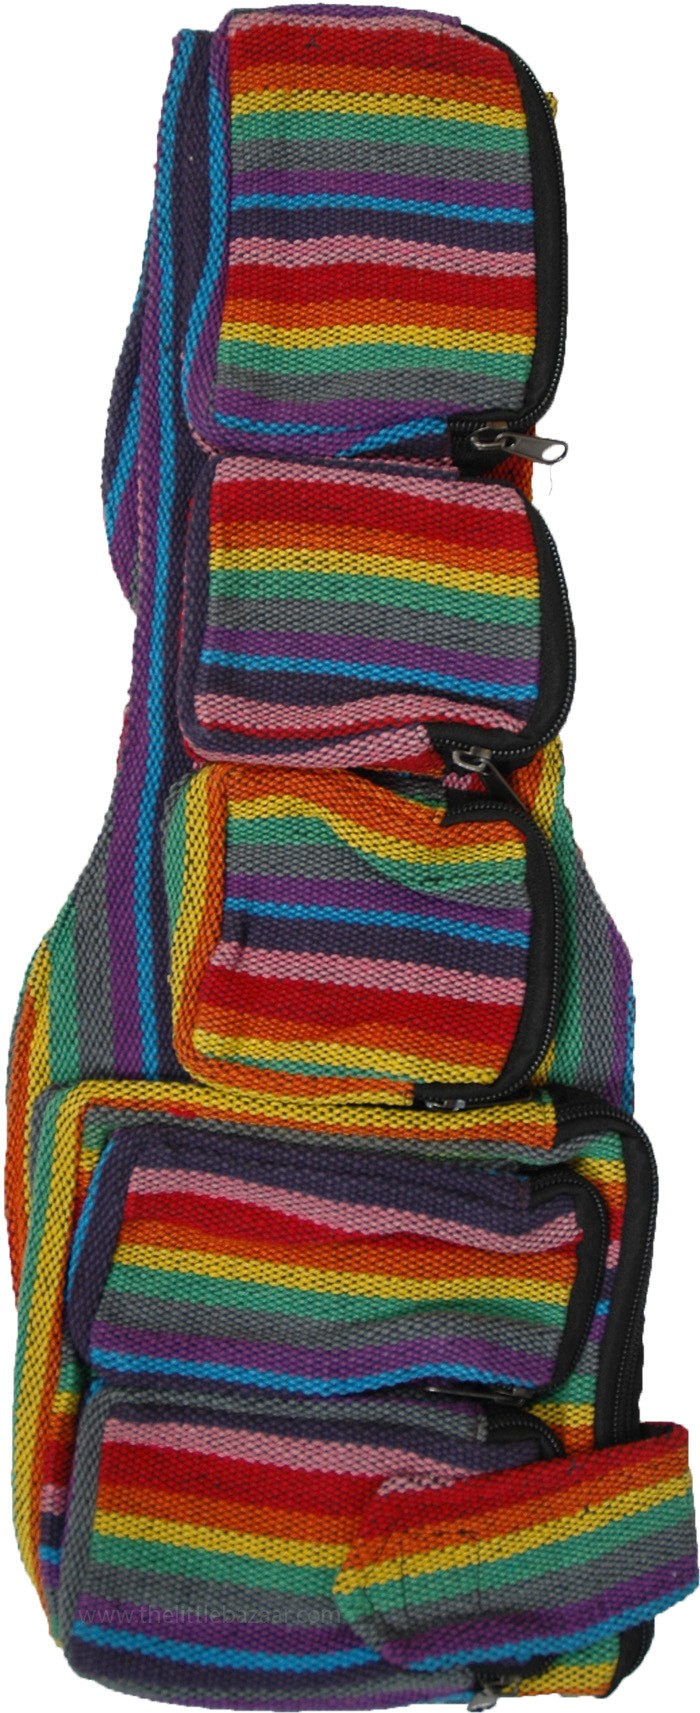 Rainbow Side Sling Bag with Multiple Zipper Pockets